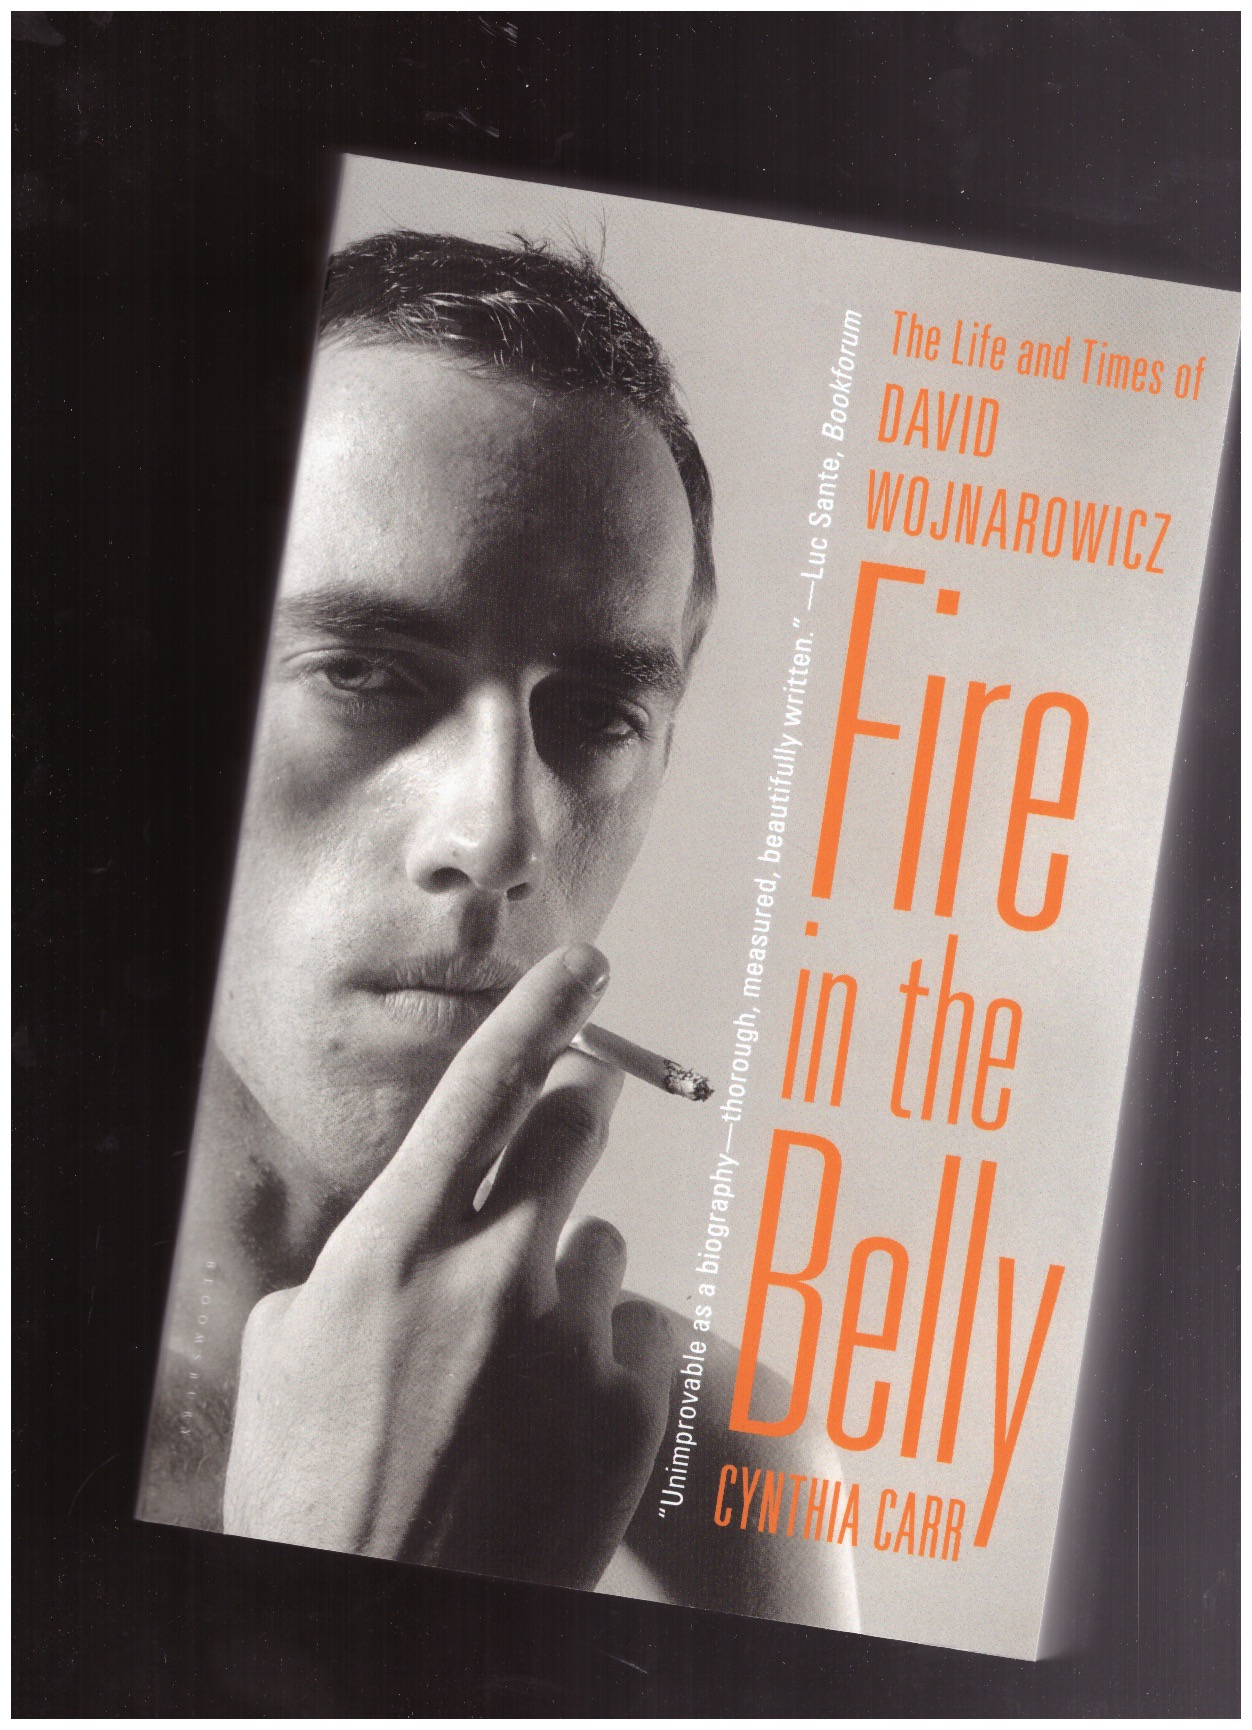 CARR, Cynthia - Fire in the Belly. The Life and Times of David Wojnarowicz